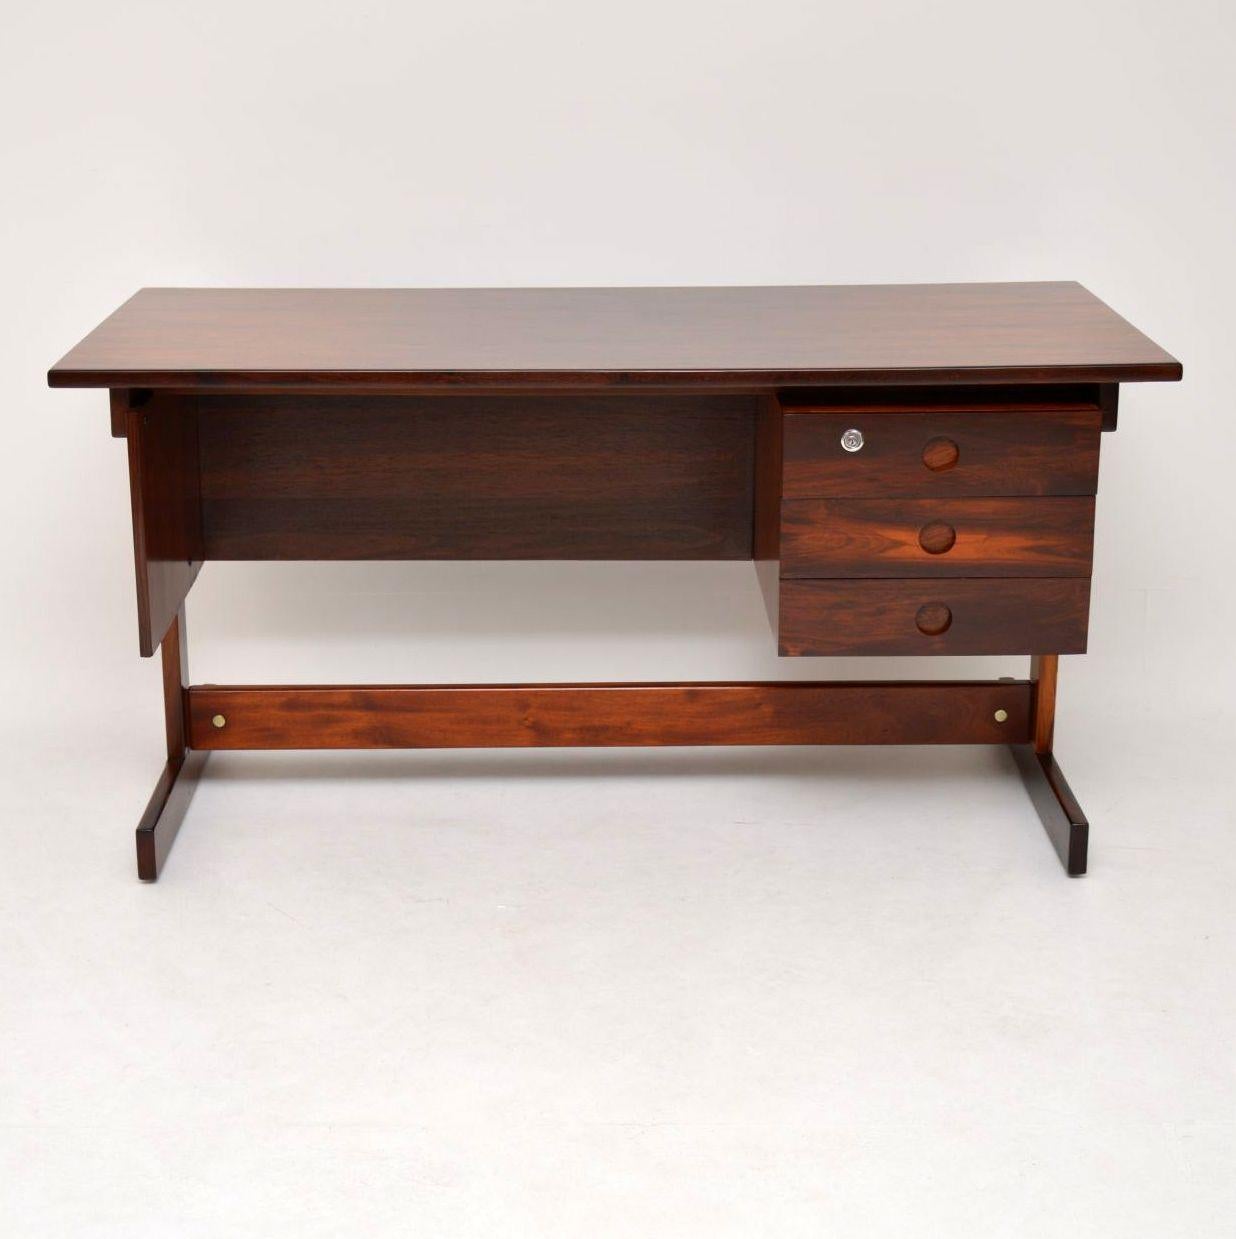 A stunning and extremely rare vintage desk by the important Brazilian designer Sergio Rodriguez, this model is called the Clara desk. It was made in the 1960s in Brazil by the manufacturer OCA. Usually seen with a twin pedestal base, that version is